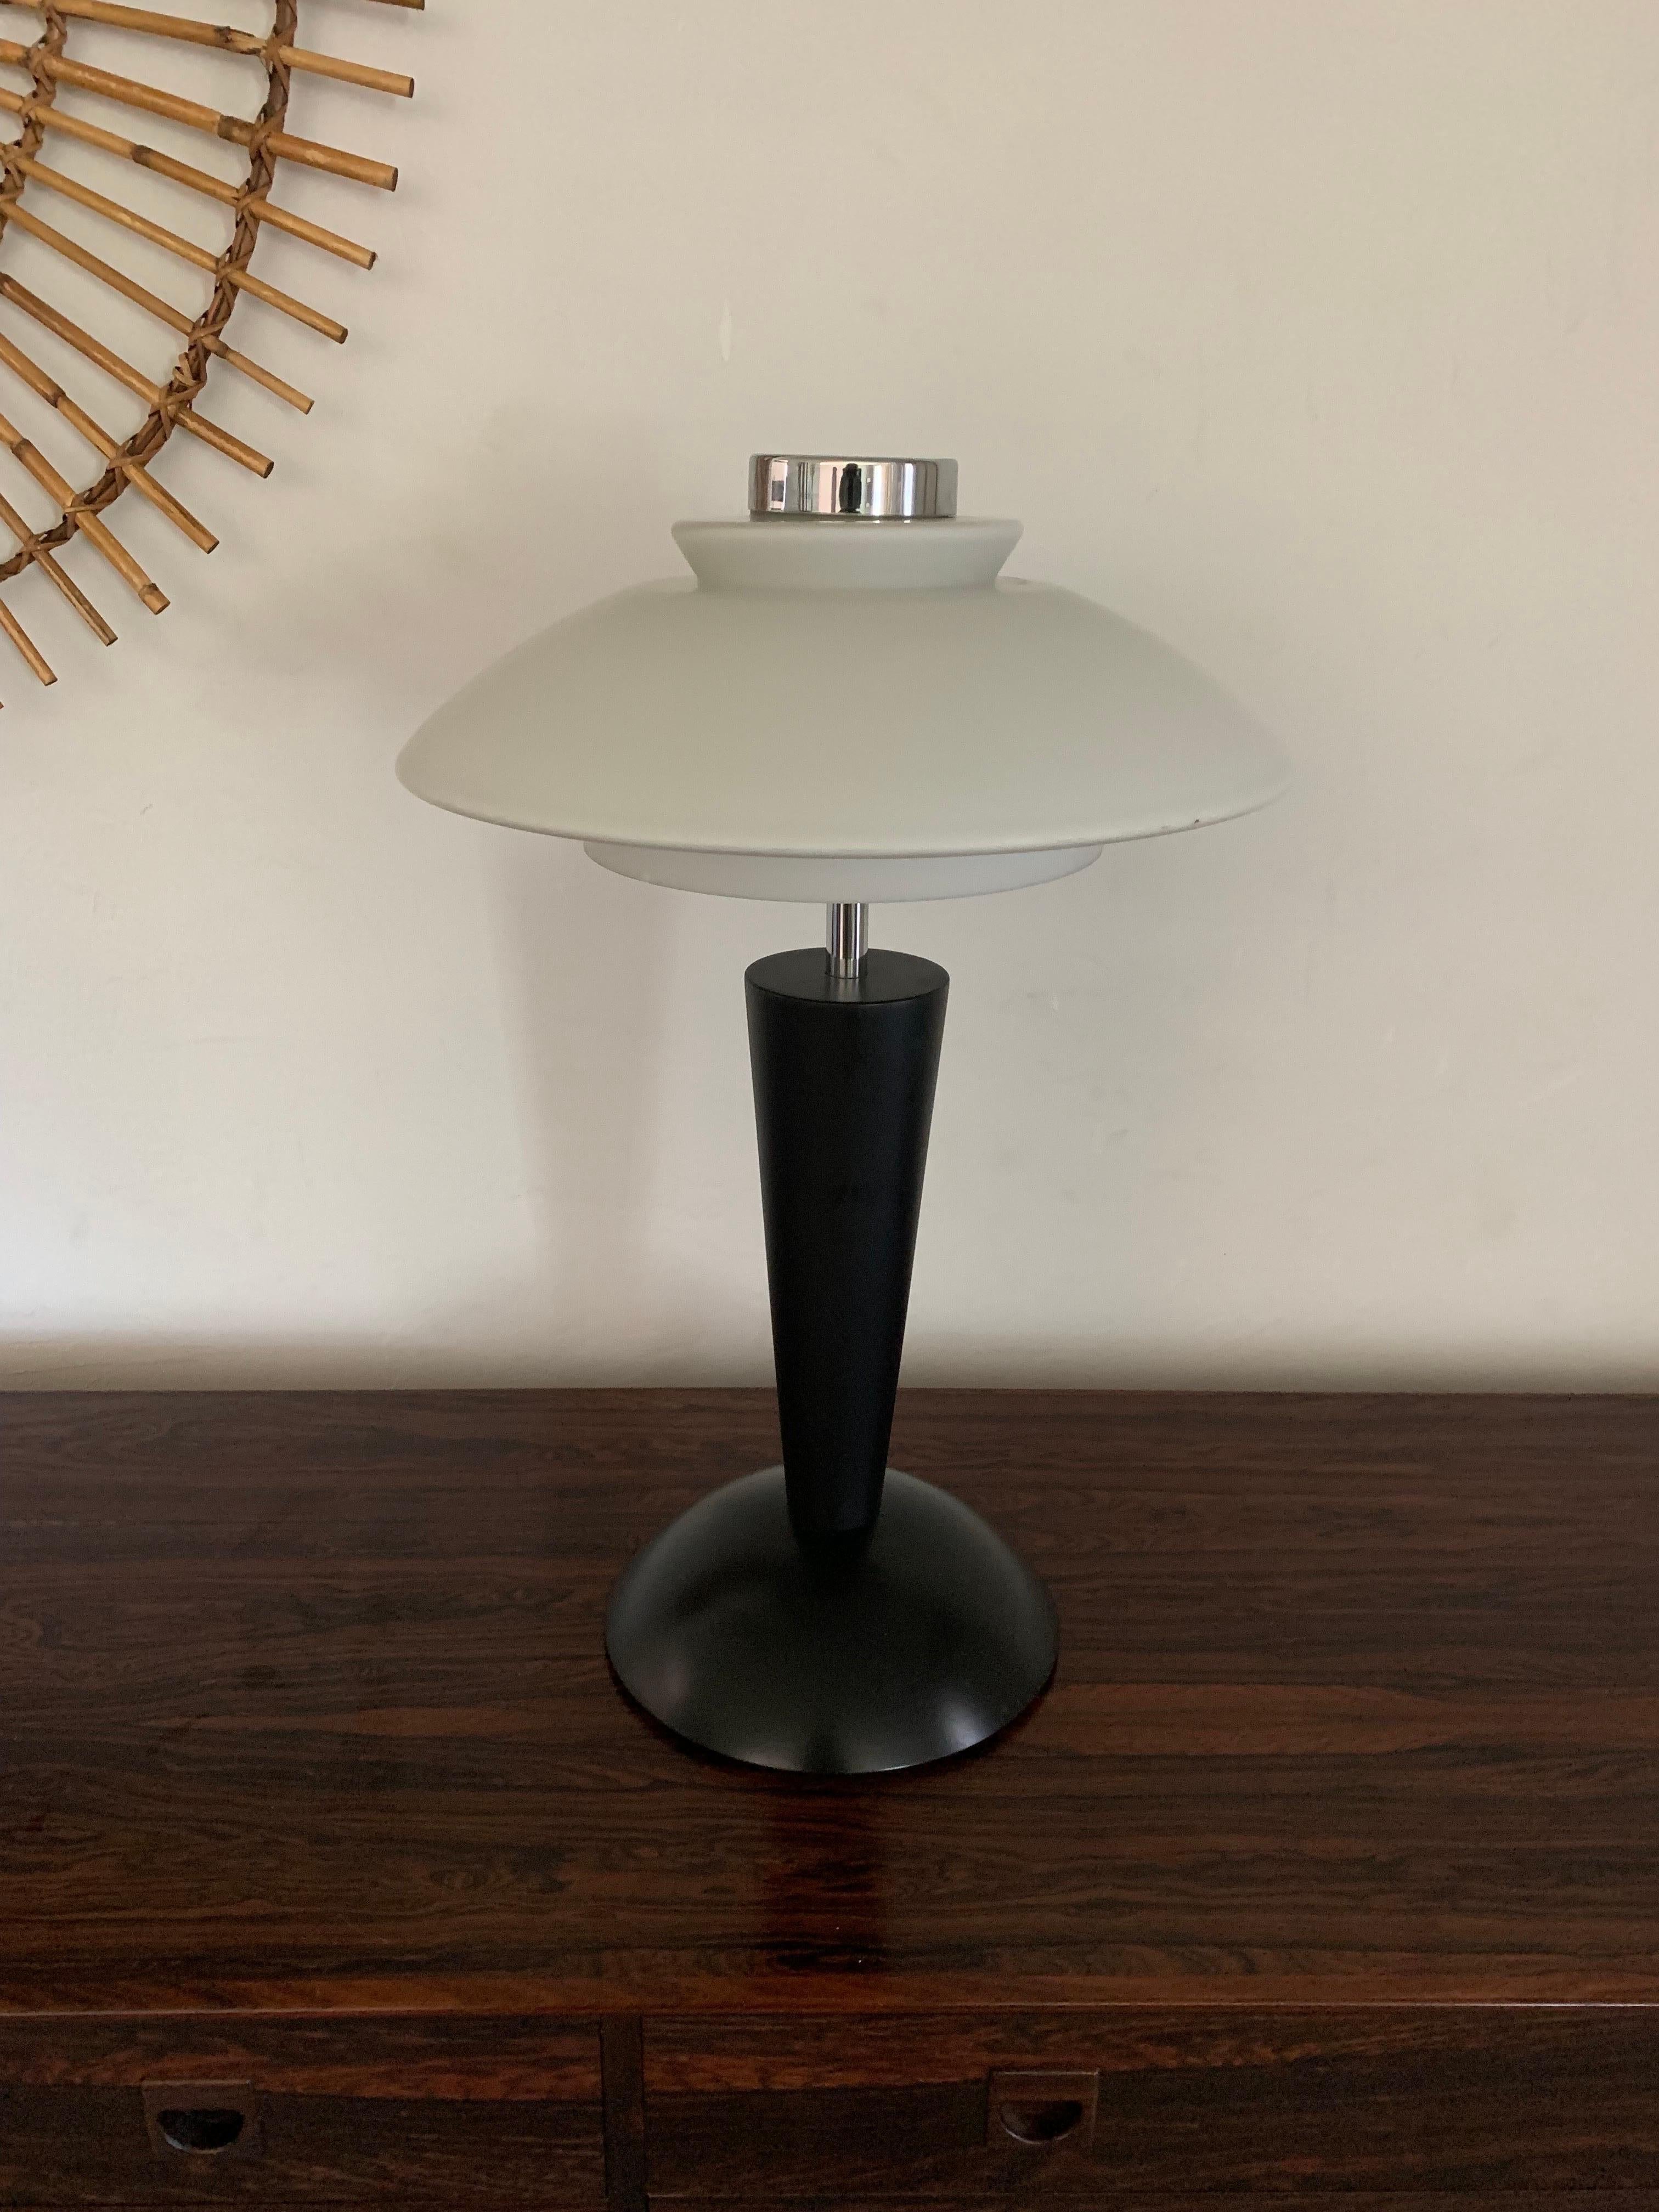 A Peill and Putzler table lamp. Similar in design to Poul Henningsen. 

Featuring a black base, chrome hardware and a thick white frosted glass shade. Lamp is well made and heavy. Has a dial for 3 separate lighting settings. 

Lamp is 
16” wide
16”